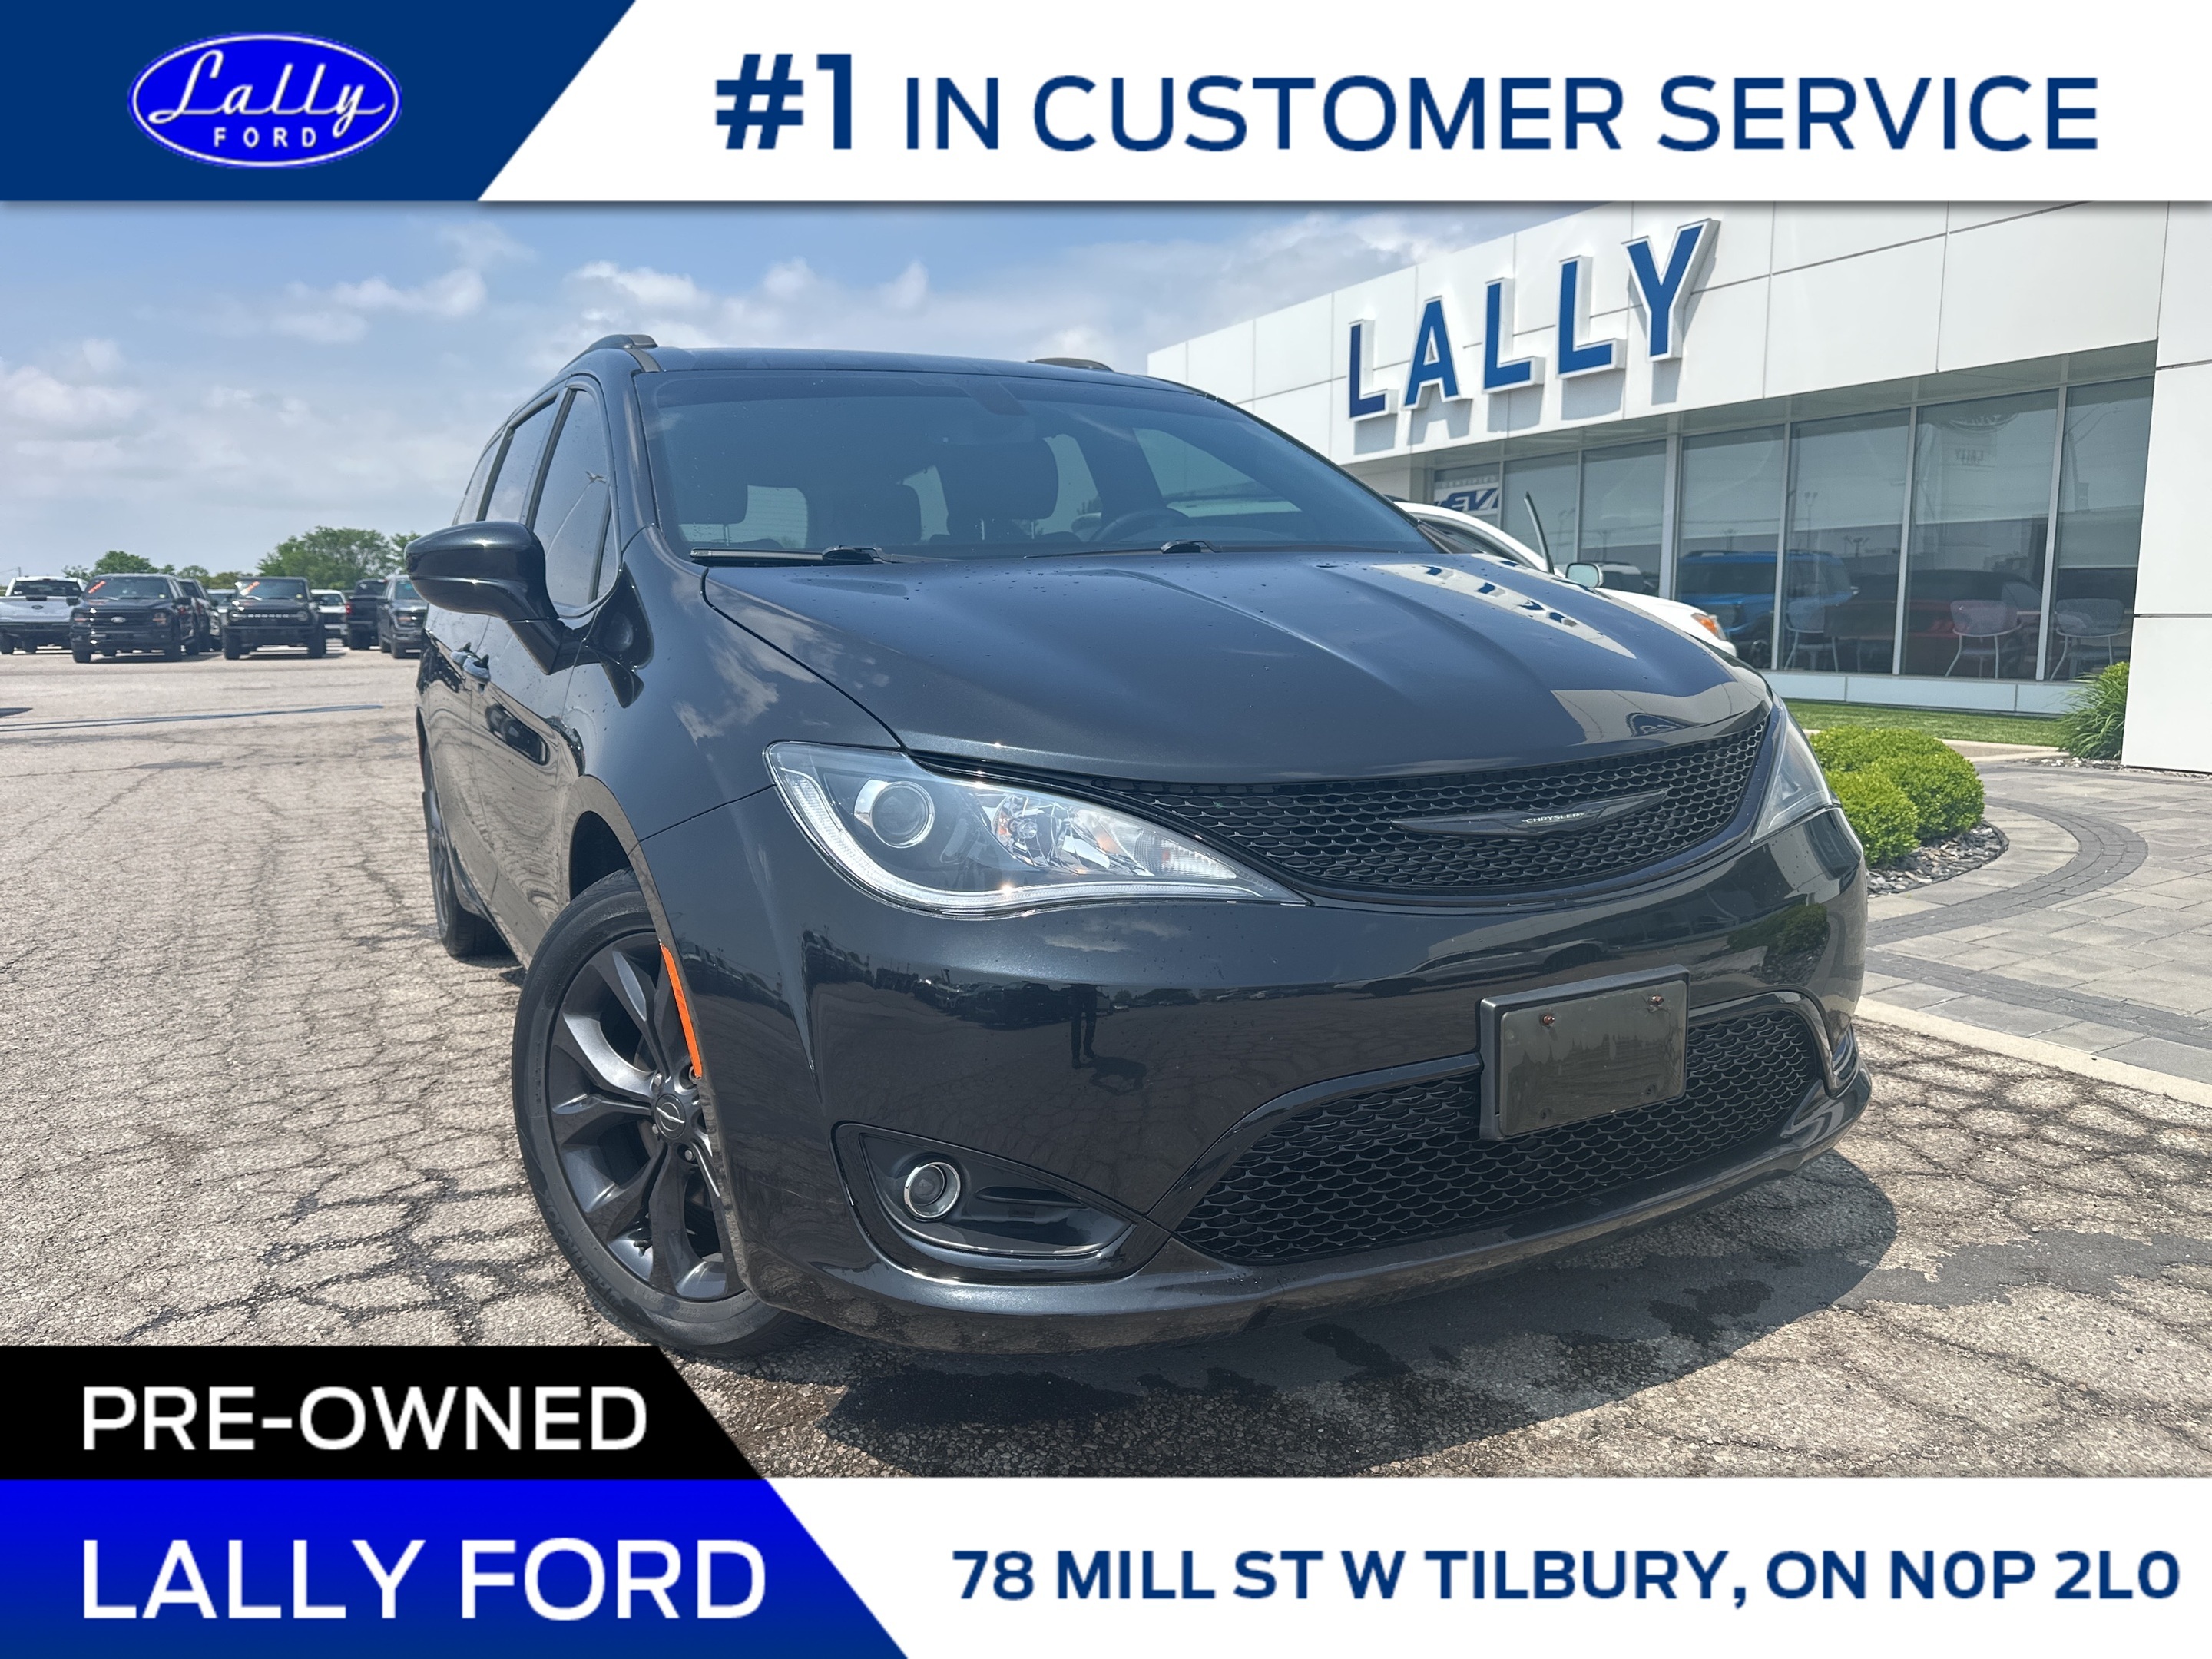 2019 Chrysler Pacifica Touring-L, Leather, Low Km’s, Rear DVD!